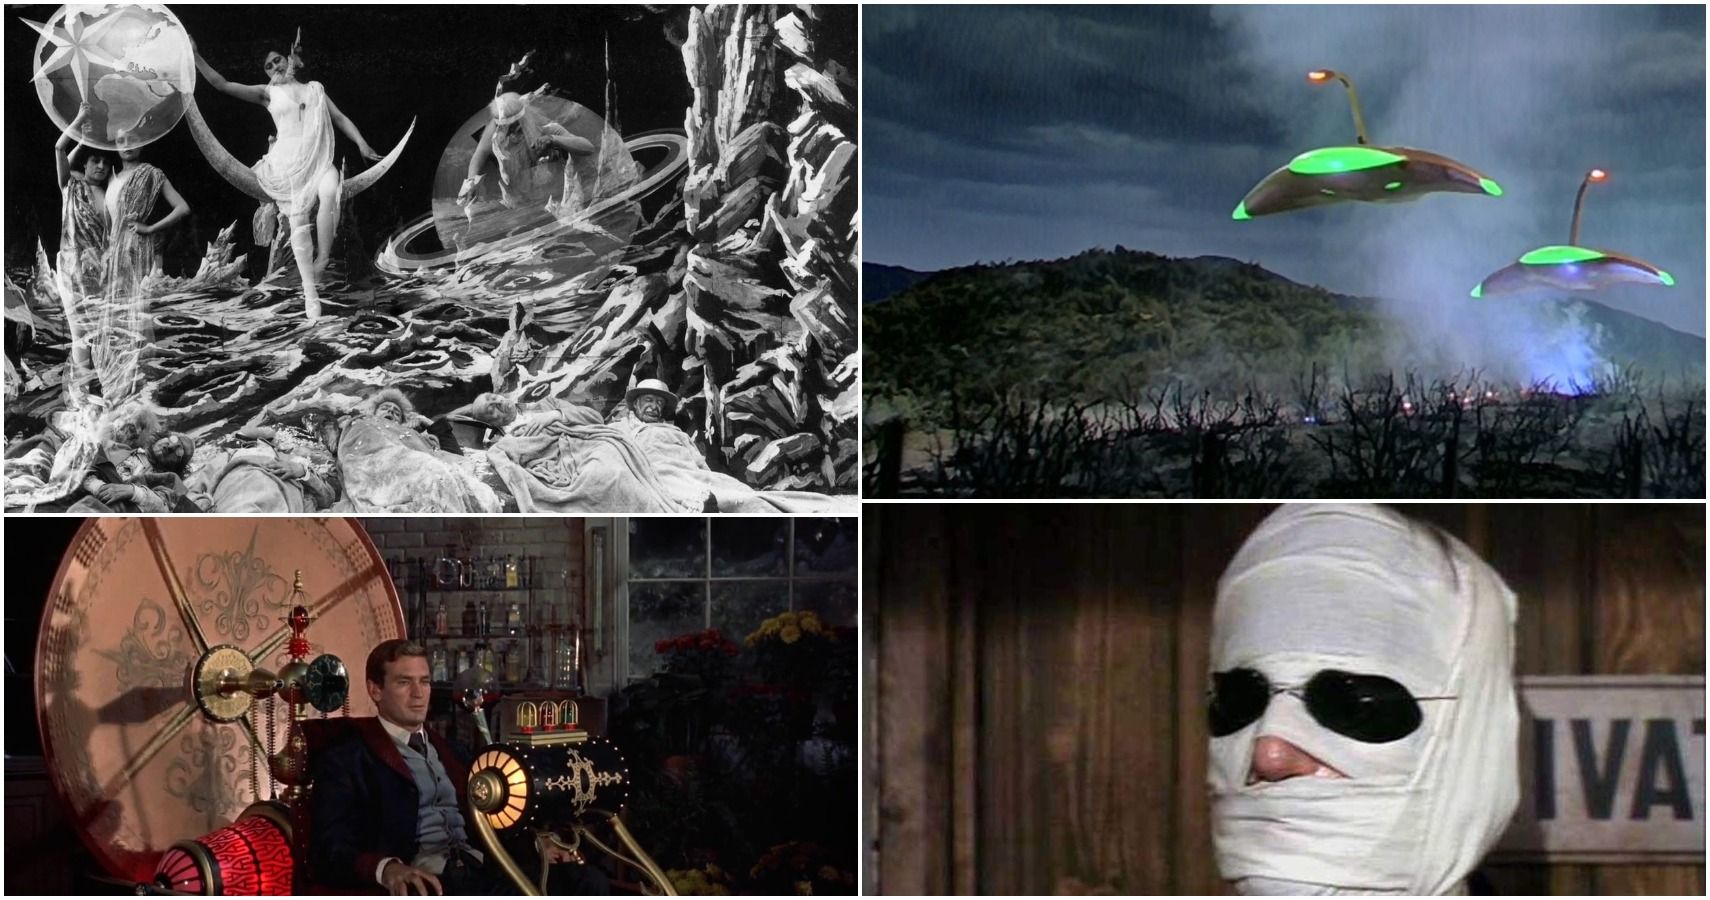 Invisible Man 10 Best HG Wells Inspired Movies And Shows Ranked According To IMDb